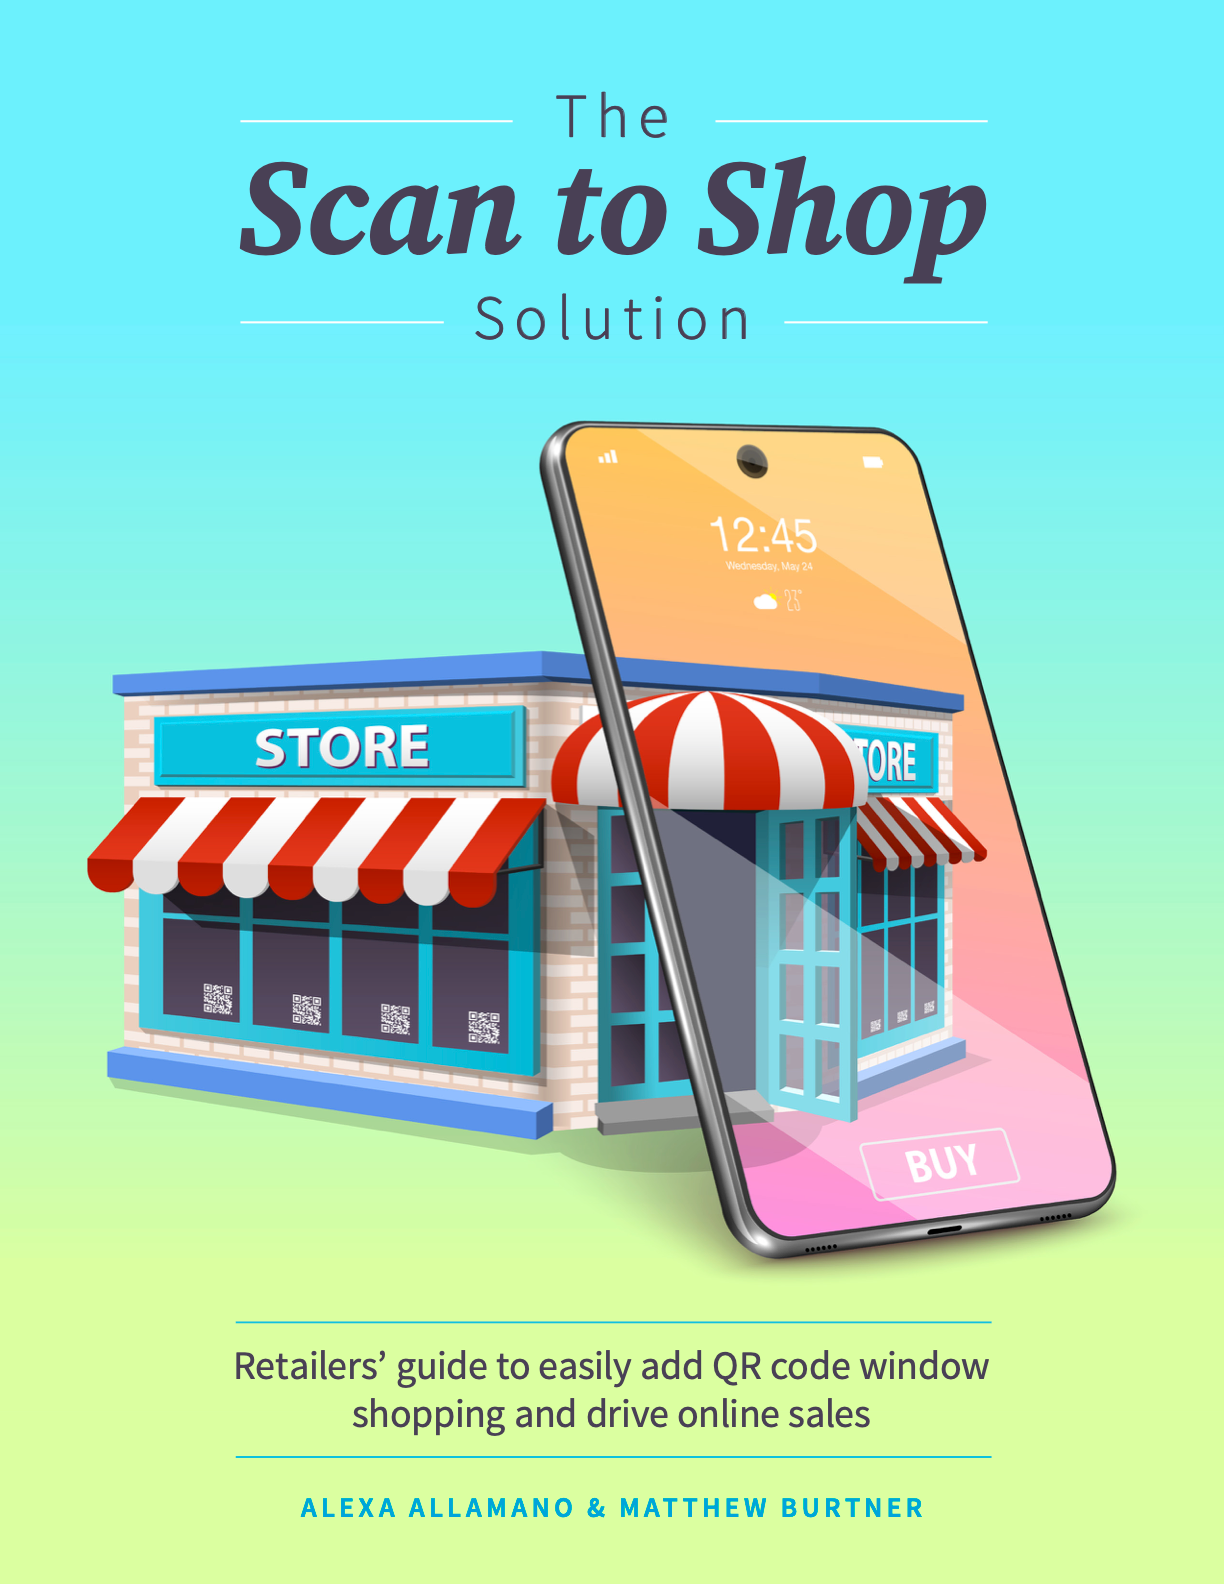 The Scan to Shop Solution: guidebook for omnichannel window shopping with QR codes